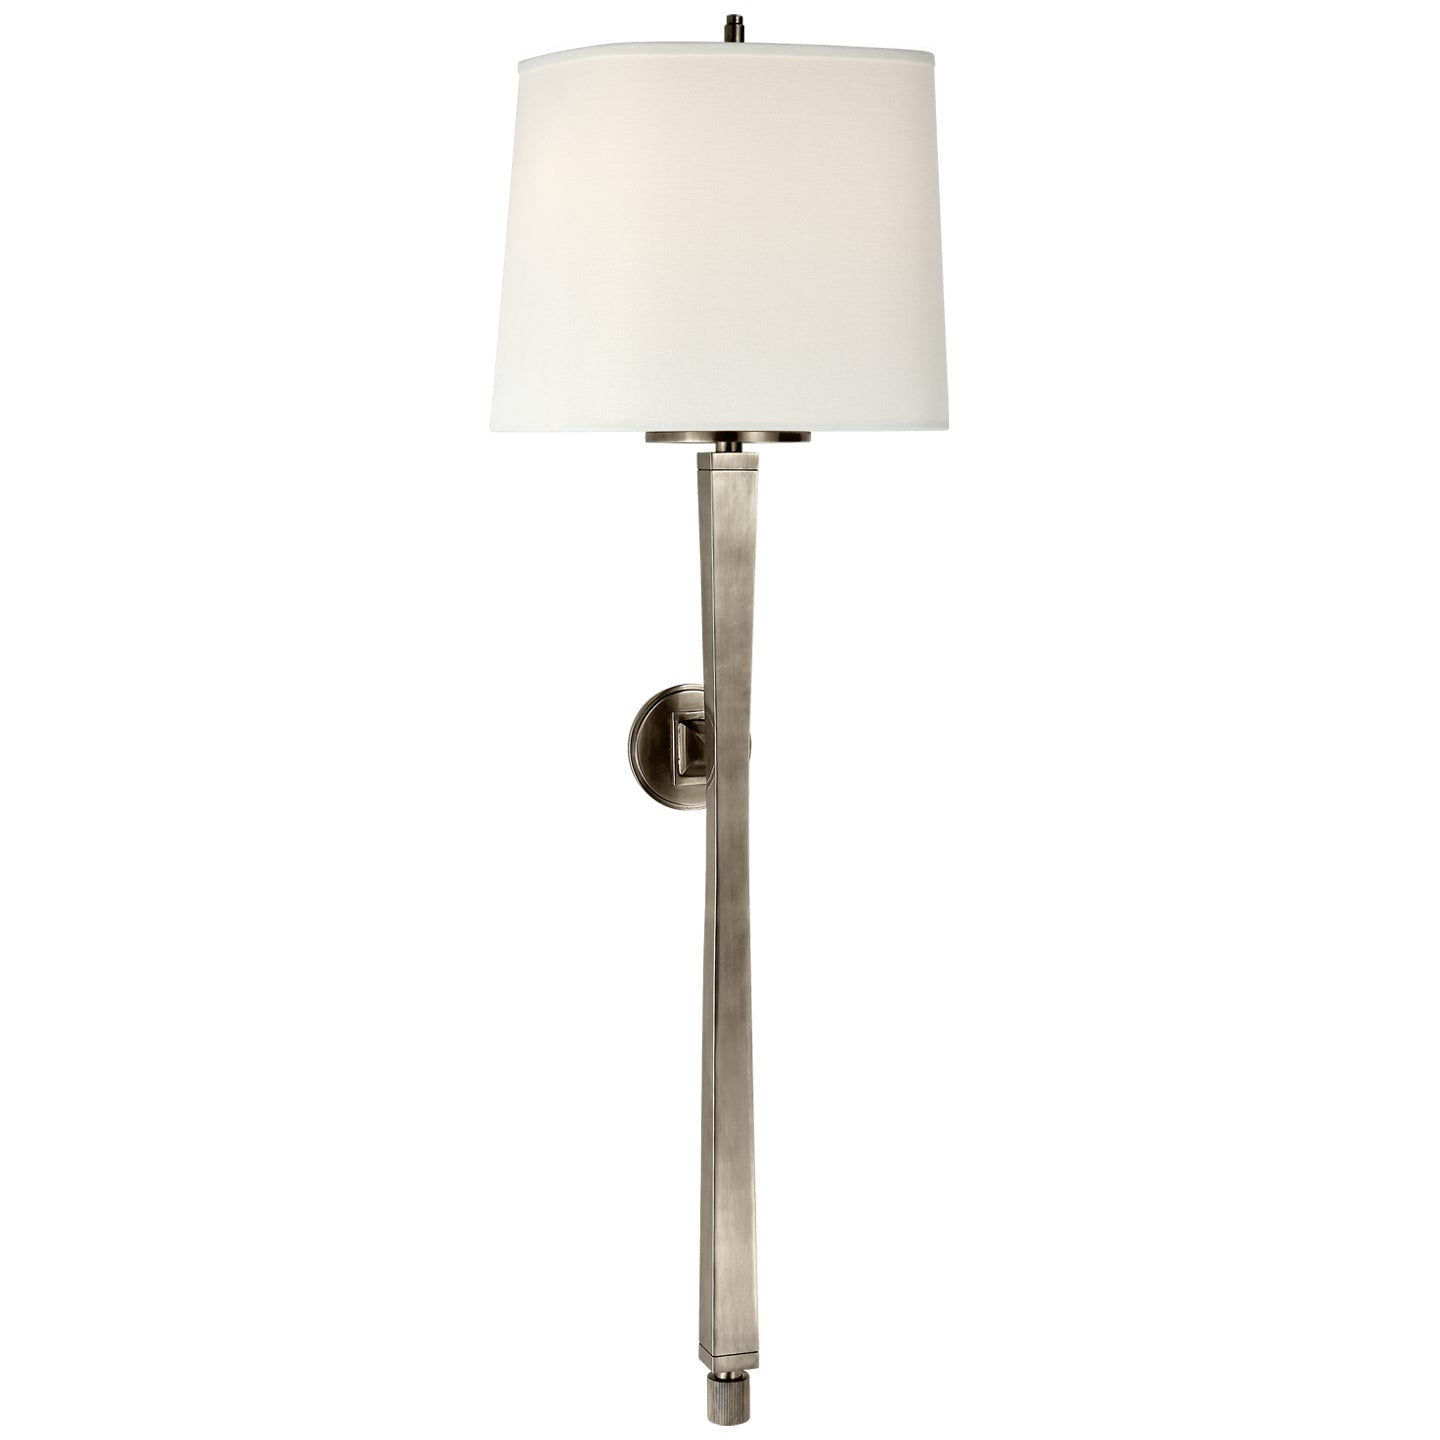 Visual Comfort Signature - TOB 2741AN-L - Two Light Wall Sconce - Edie - Antique Nickel